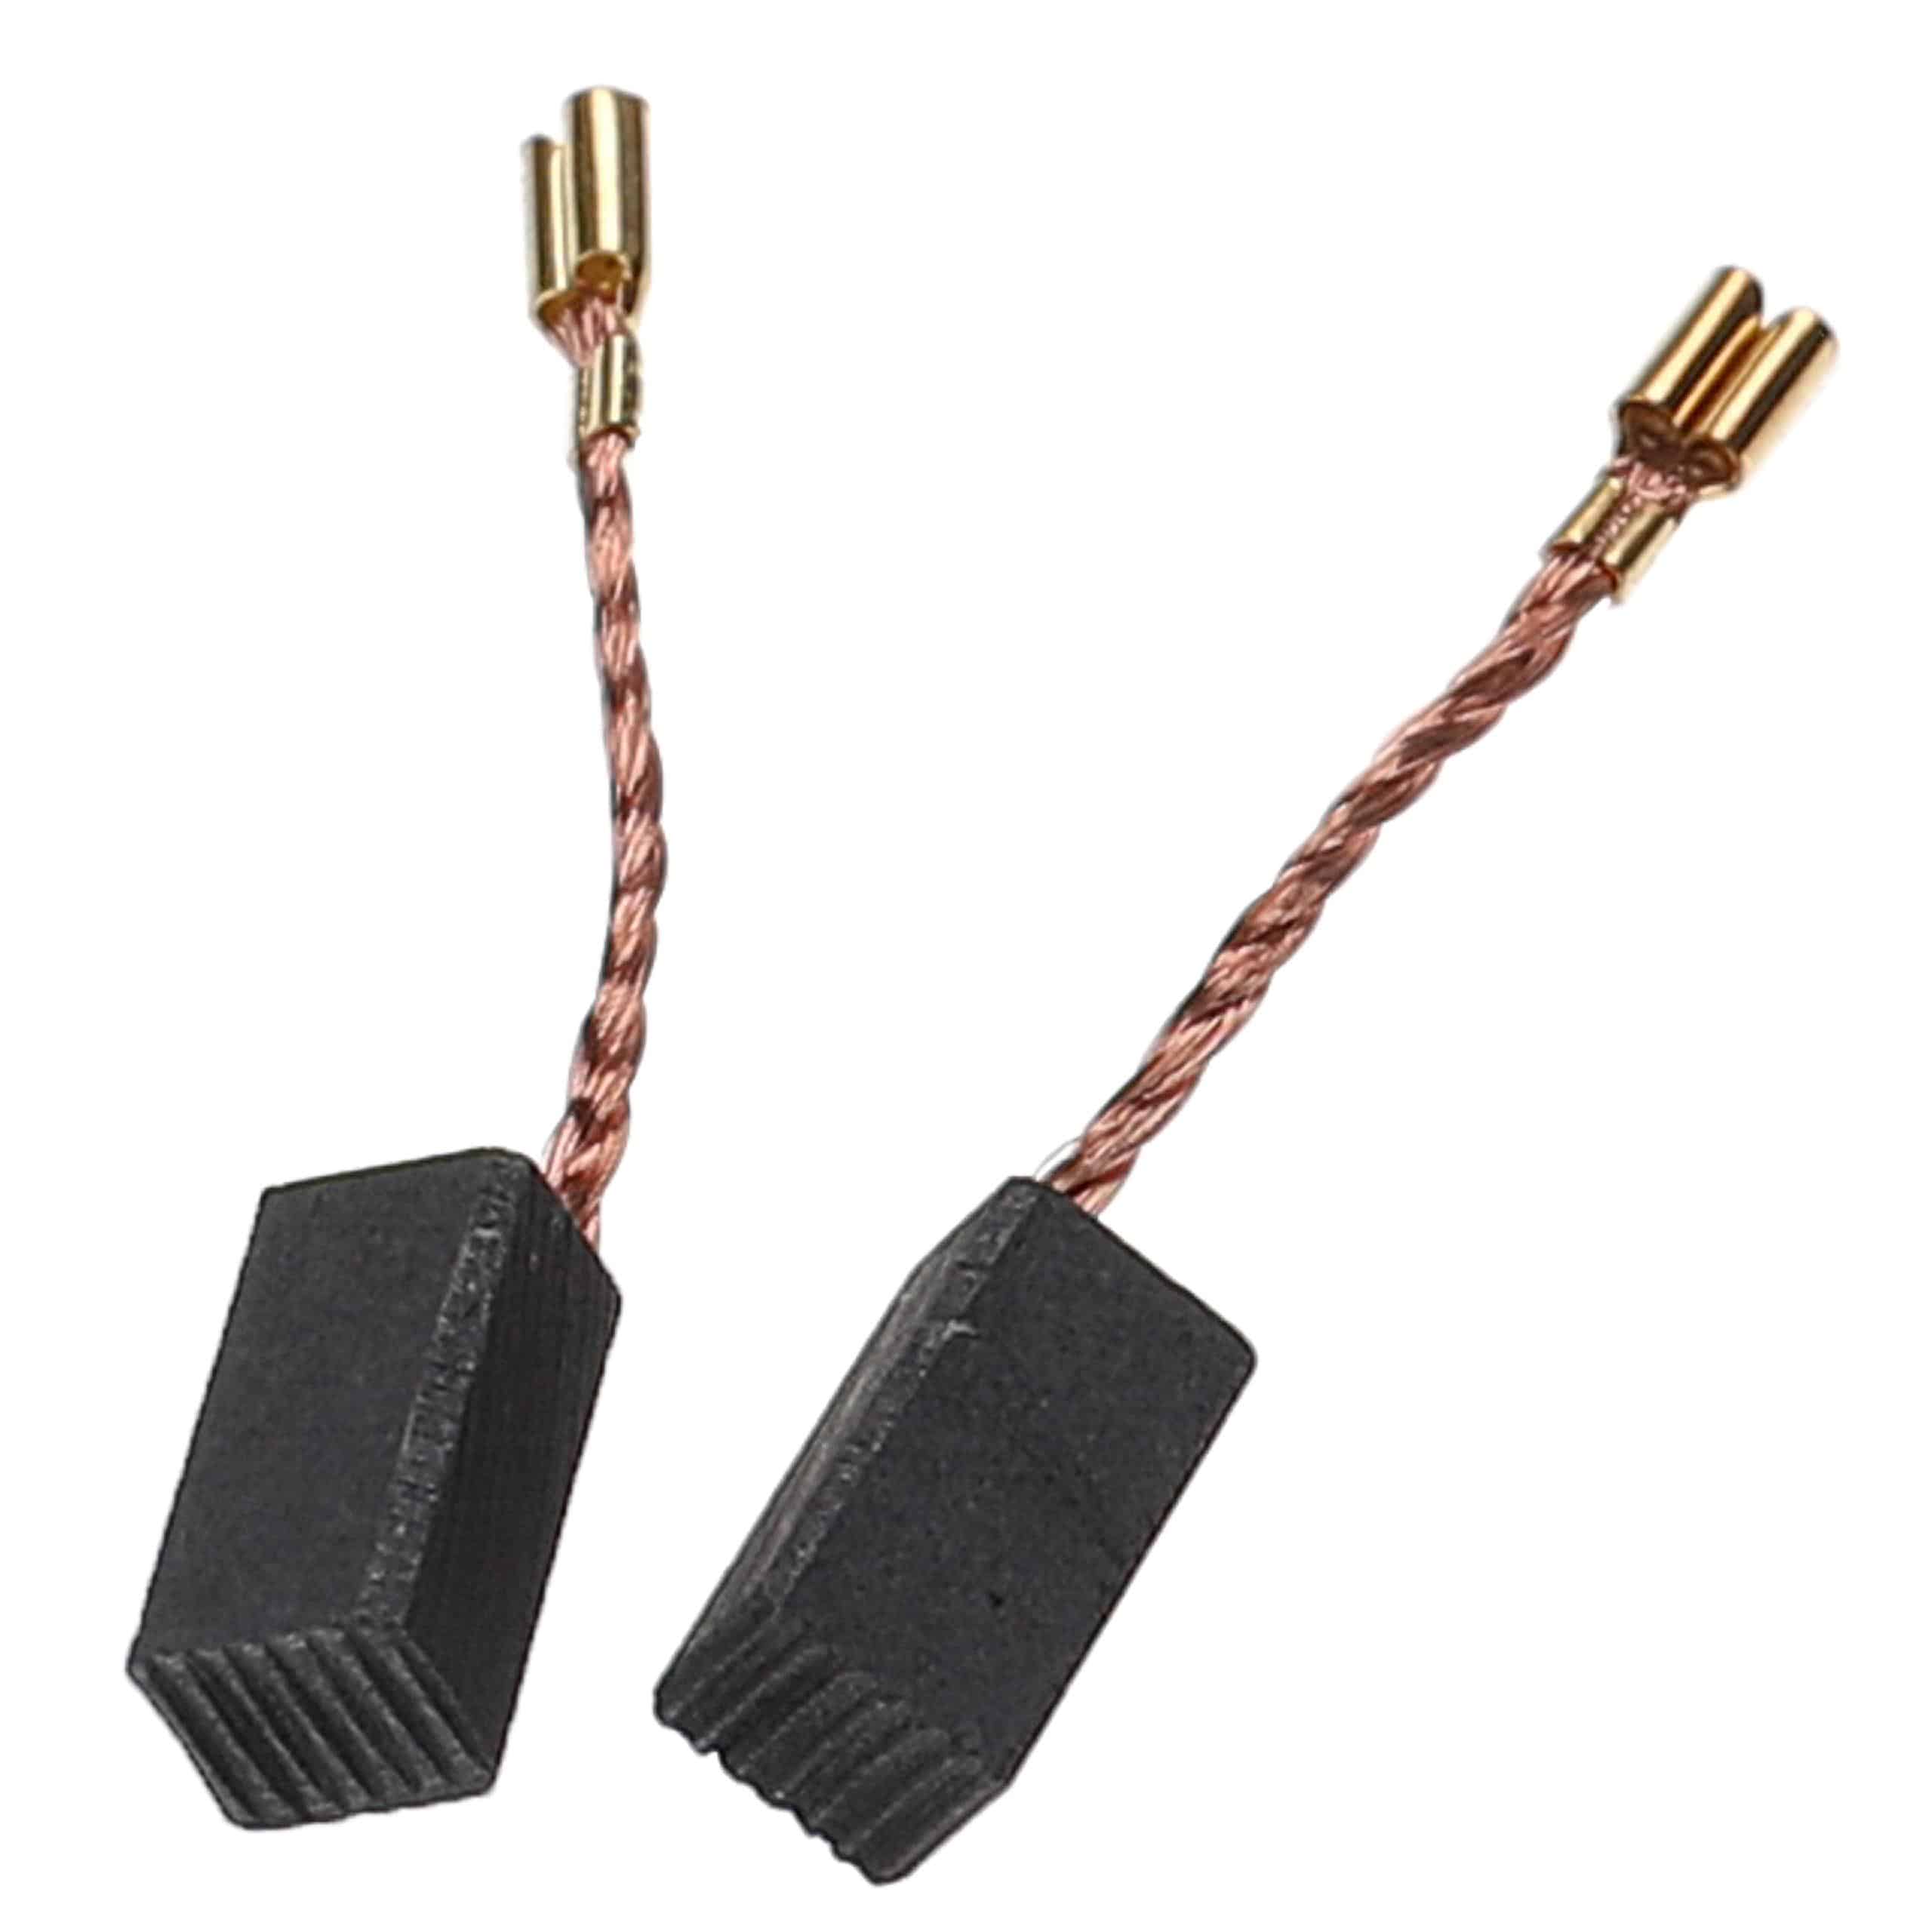 2x Carbon Brush as Replacement for Hitachi 999-005 Electric Power Tools, 6.3 x 7.3 x 14mm